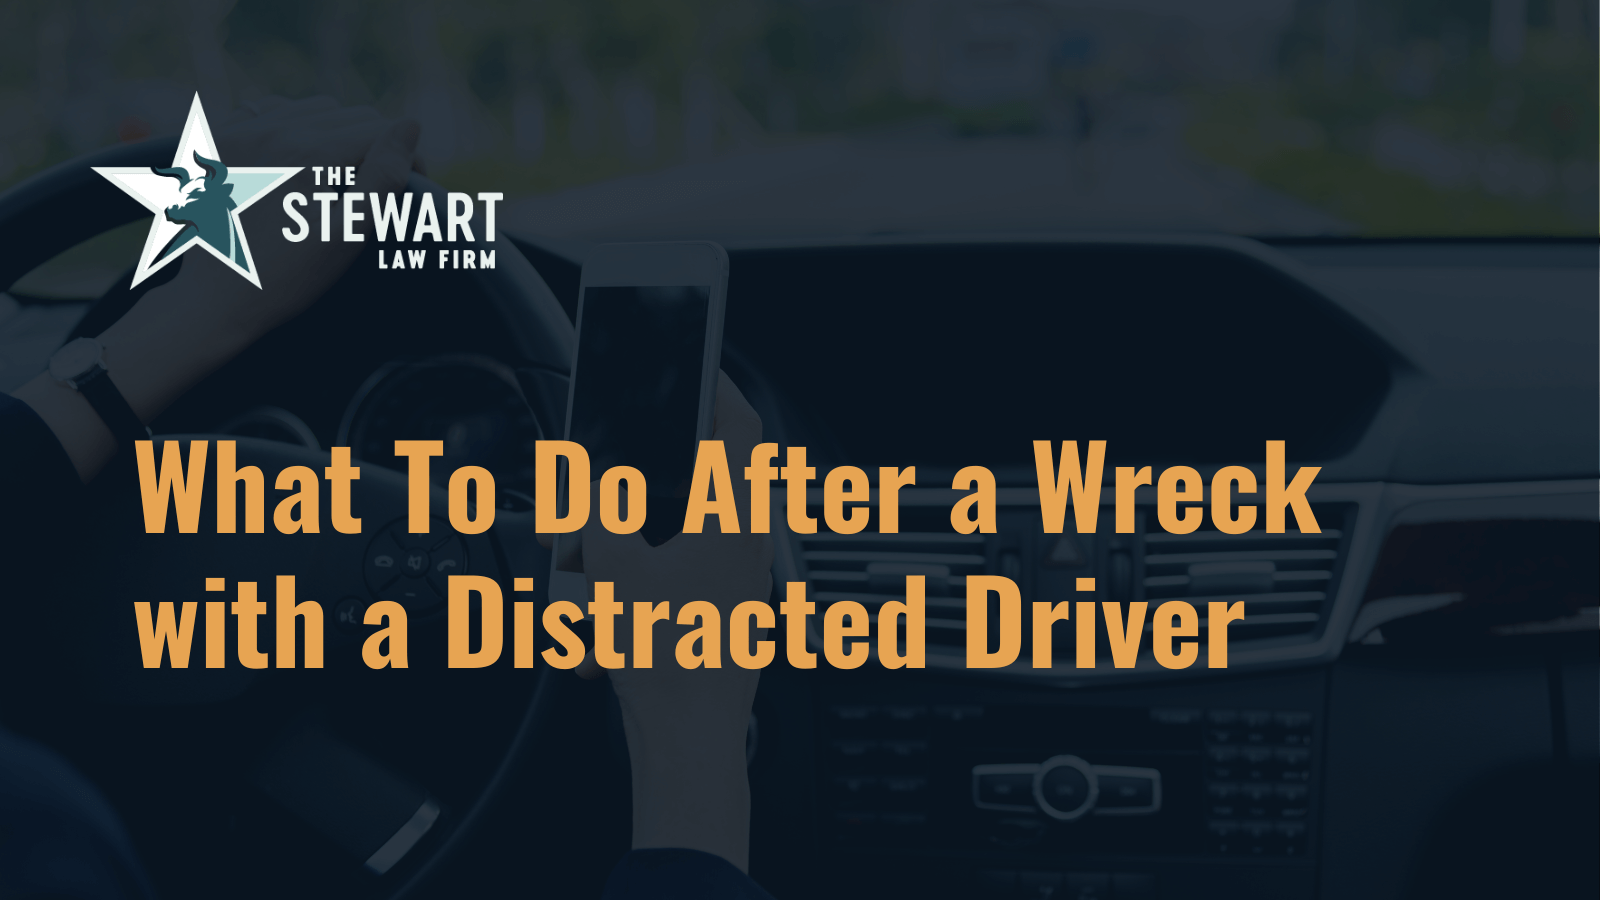 What To Do After a Wreck with a Distracted Driver - the stephen stewart law firm - austin texas personal injury lawyer